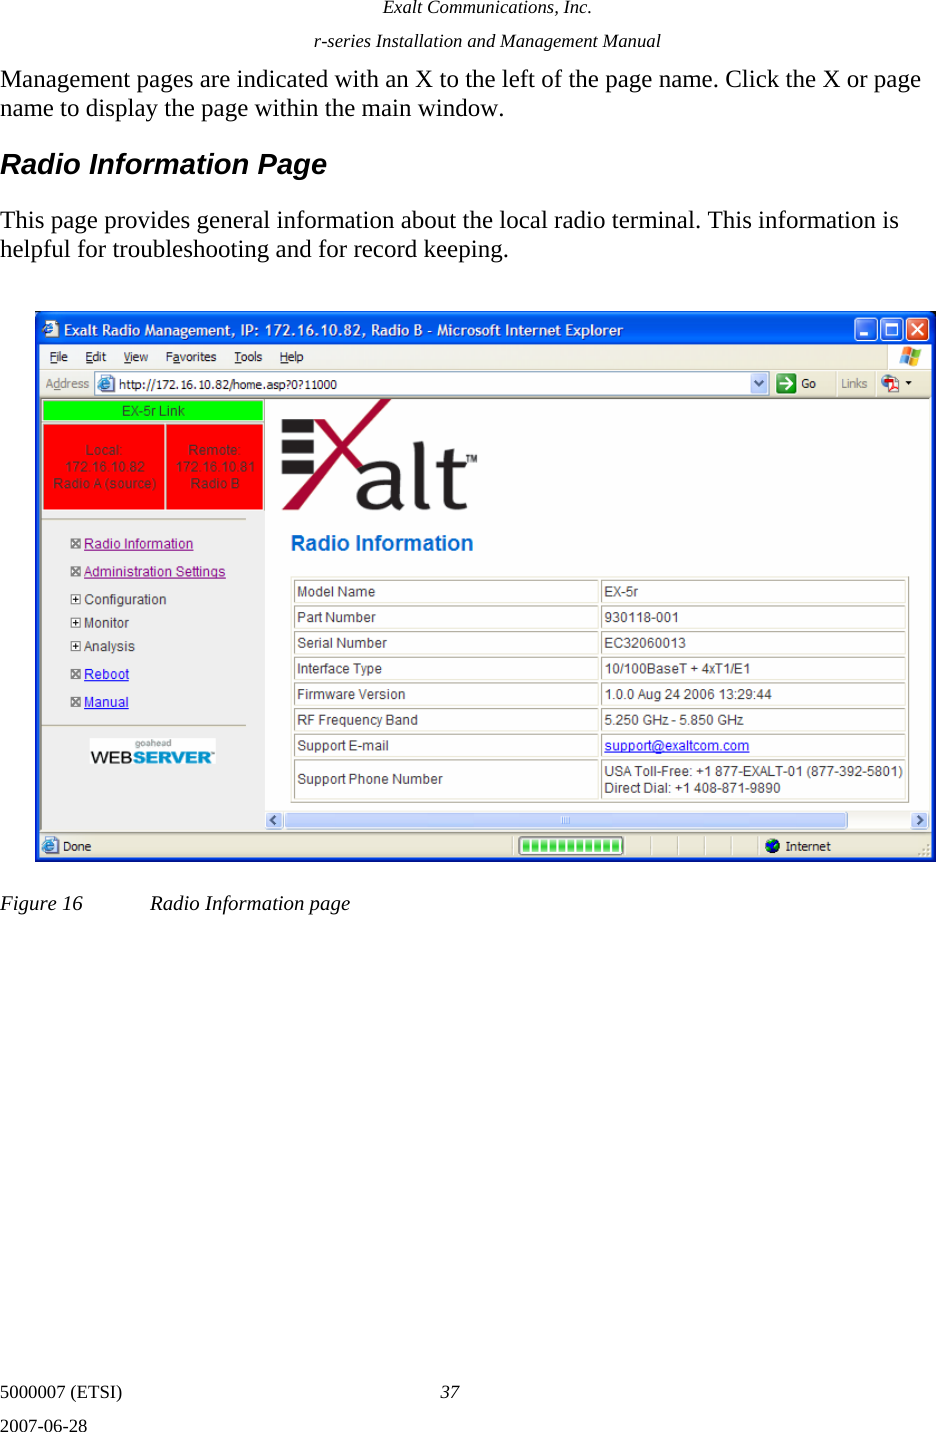 Exalt Communications, Inc. r-series Installation and Management Manual 5000007 (ETSI)  37 2007-06-28  Management pages are indicated with an X to the left of the page name. Click the X or page name to display the page within the main window. Radio Information Page This page provides general information about the local radio terminal. This information is helpful for troubleshooting and for record keeping.  Figure 16  Radio Information page 